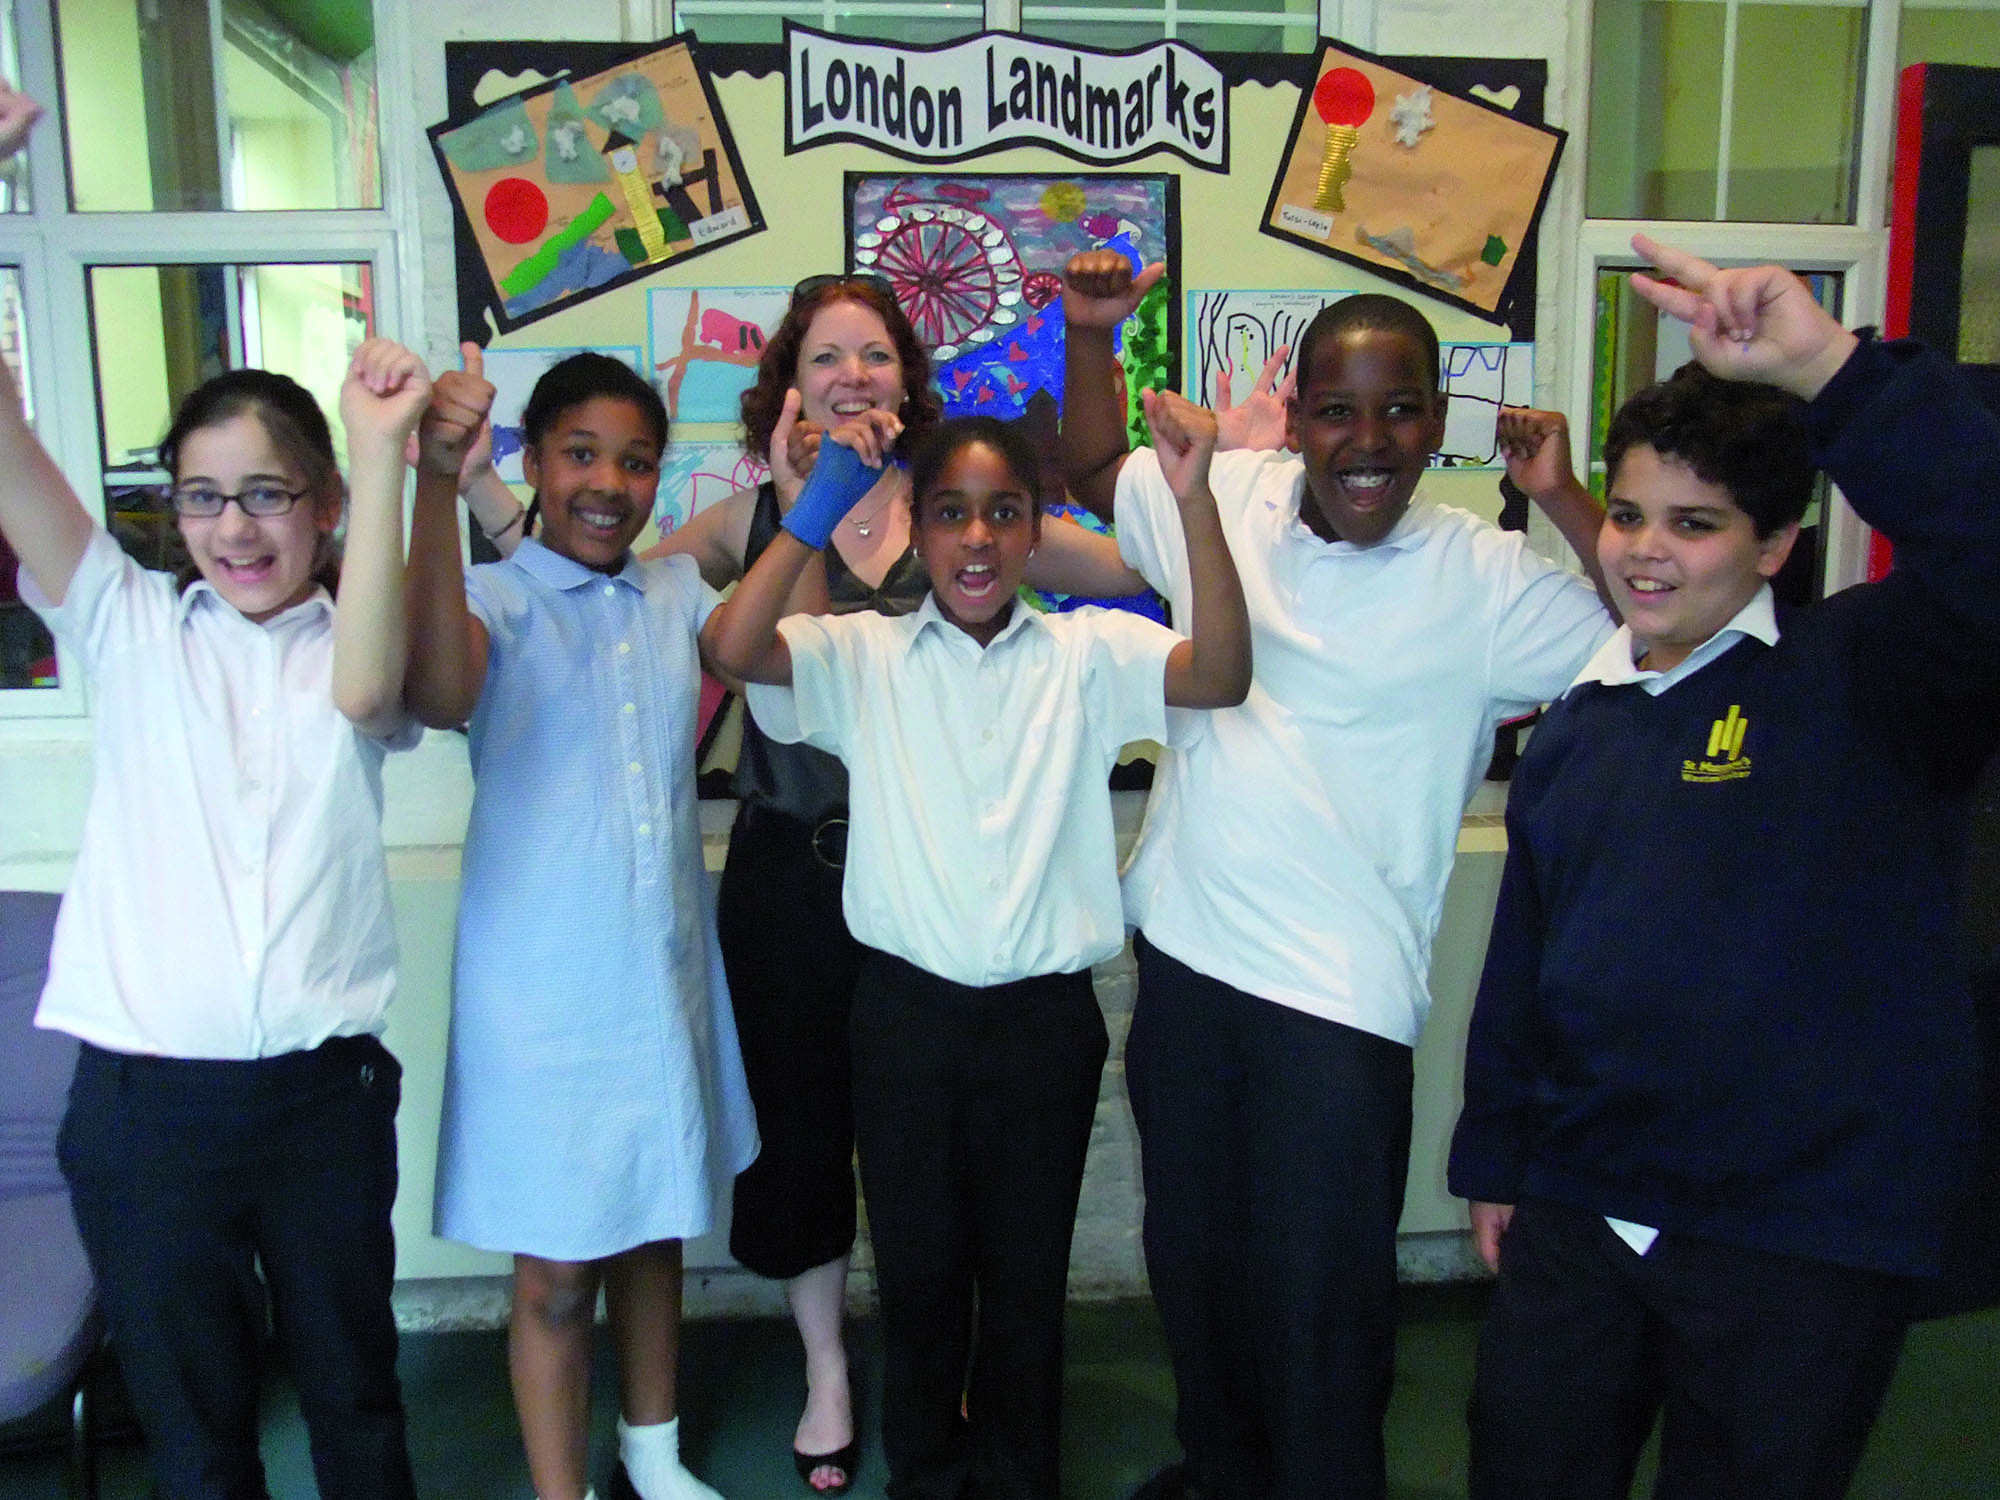 Head teacher Emily Norman and students at St. Matthew's, Westminster, get ready to celebrate the jubilee this weekend. Photo: churchofengland.org